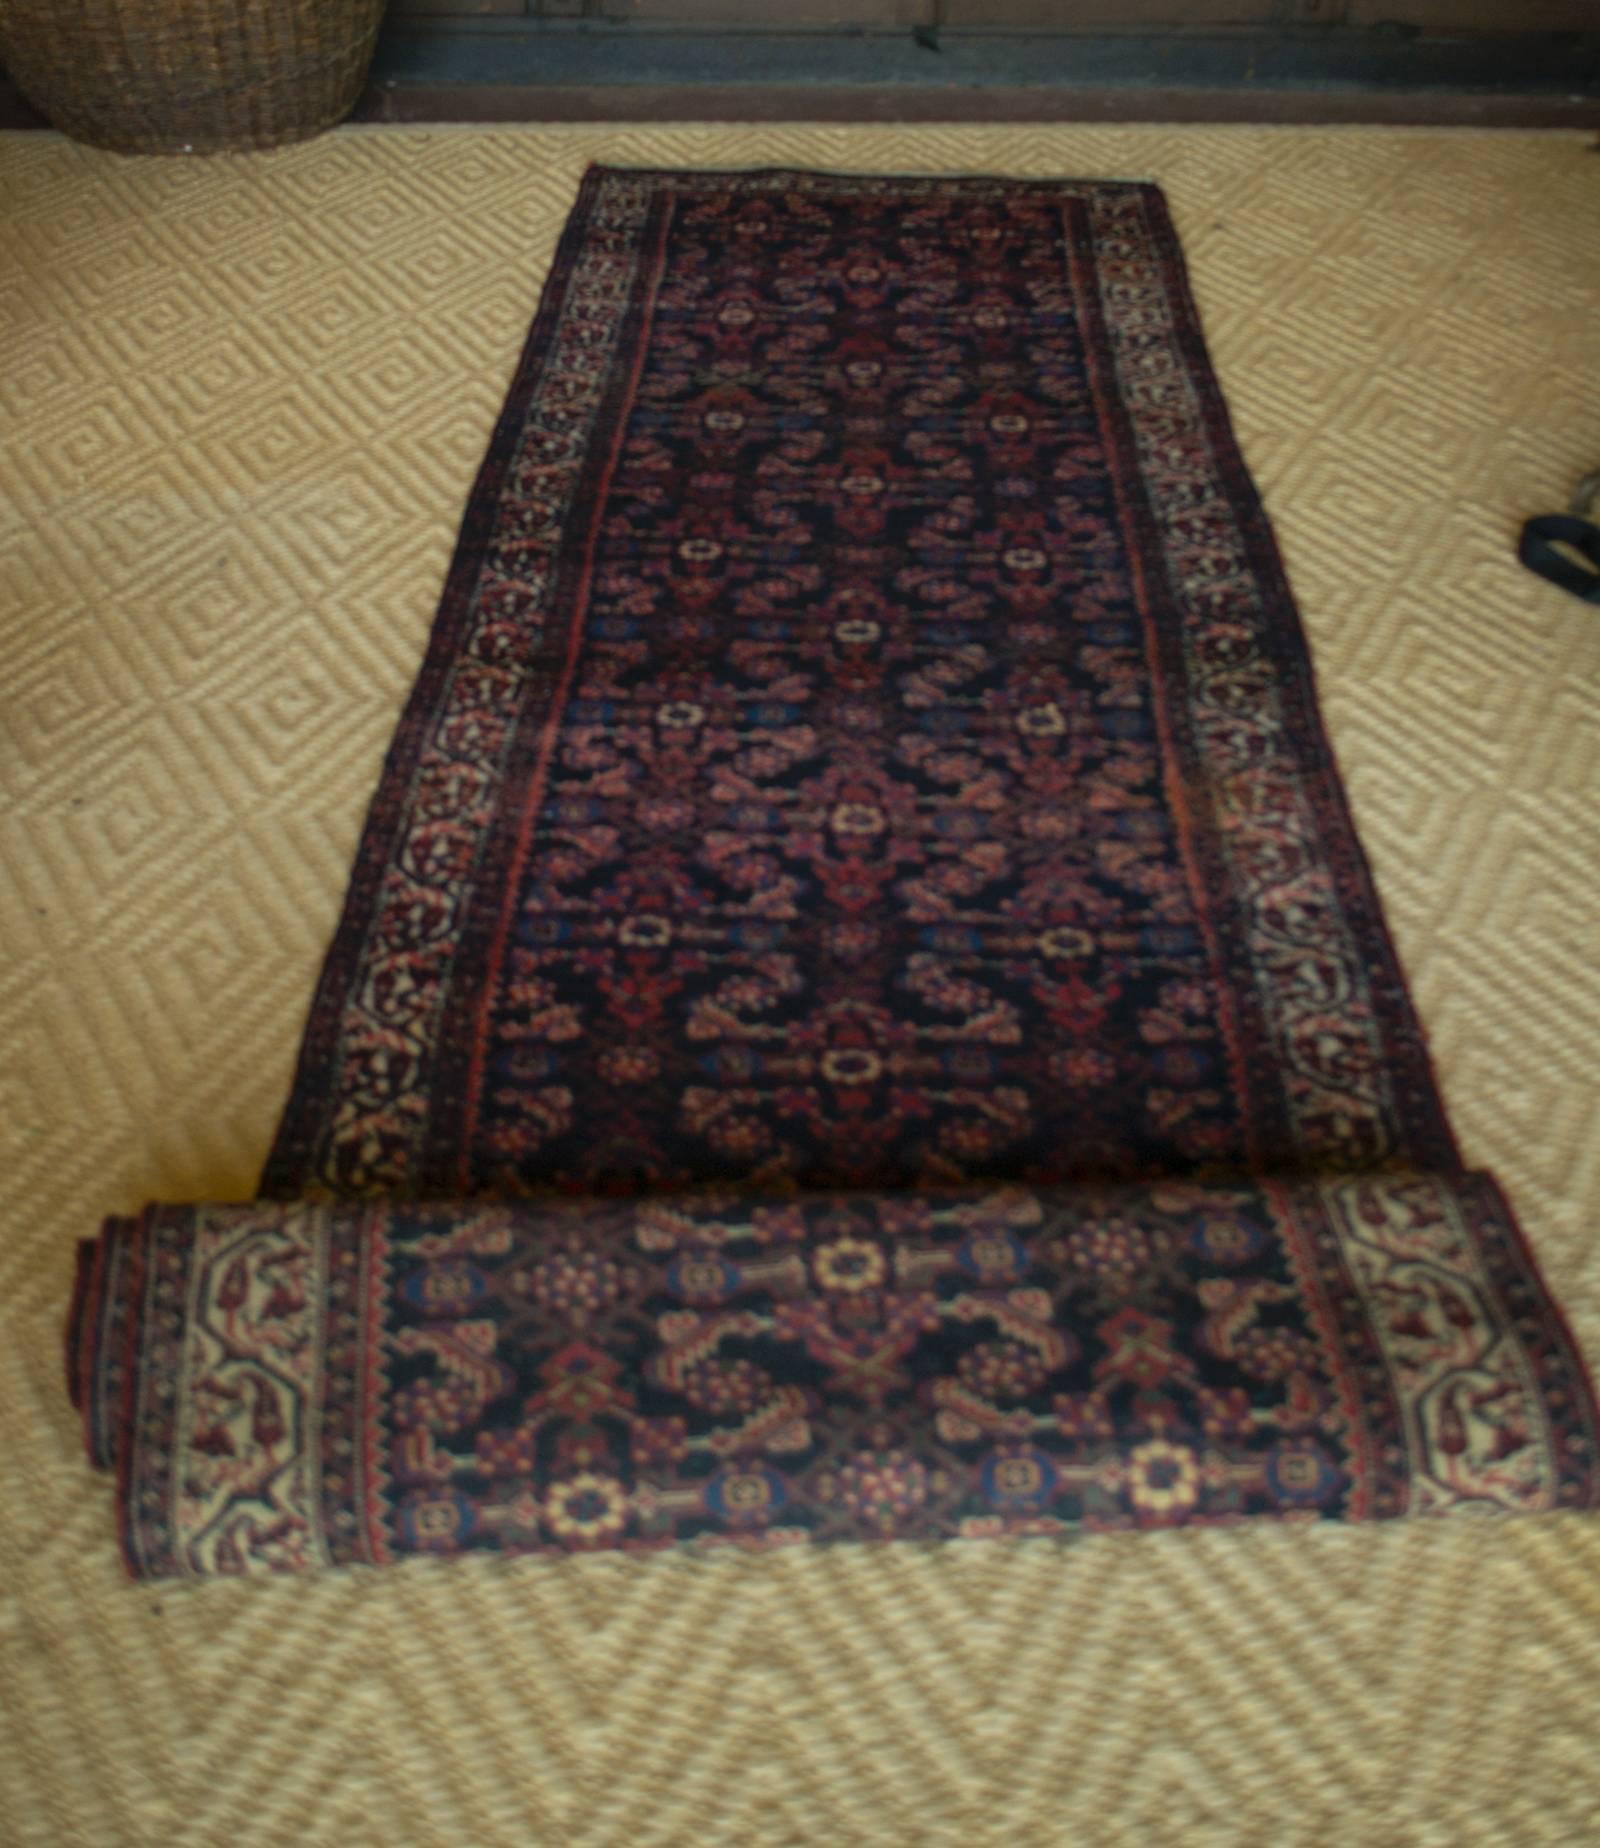 Vintage Afghan rug runner with red, blue, green, and cream interlocking motif.